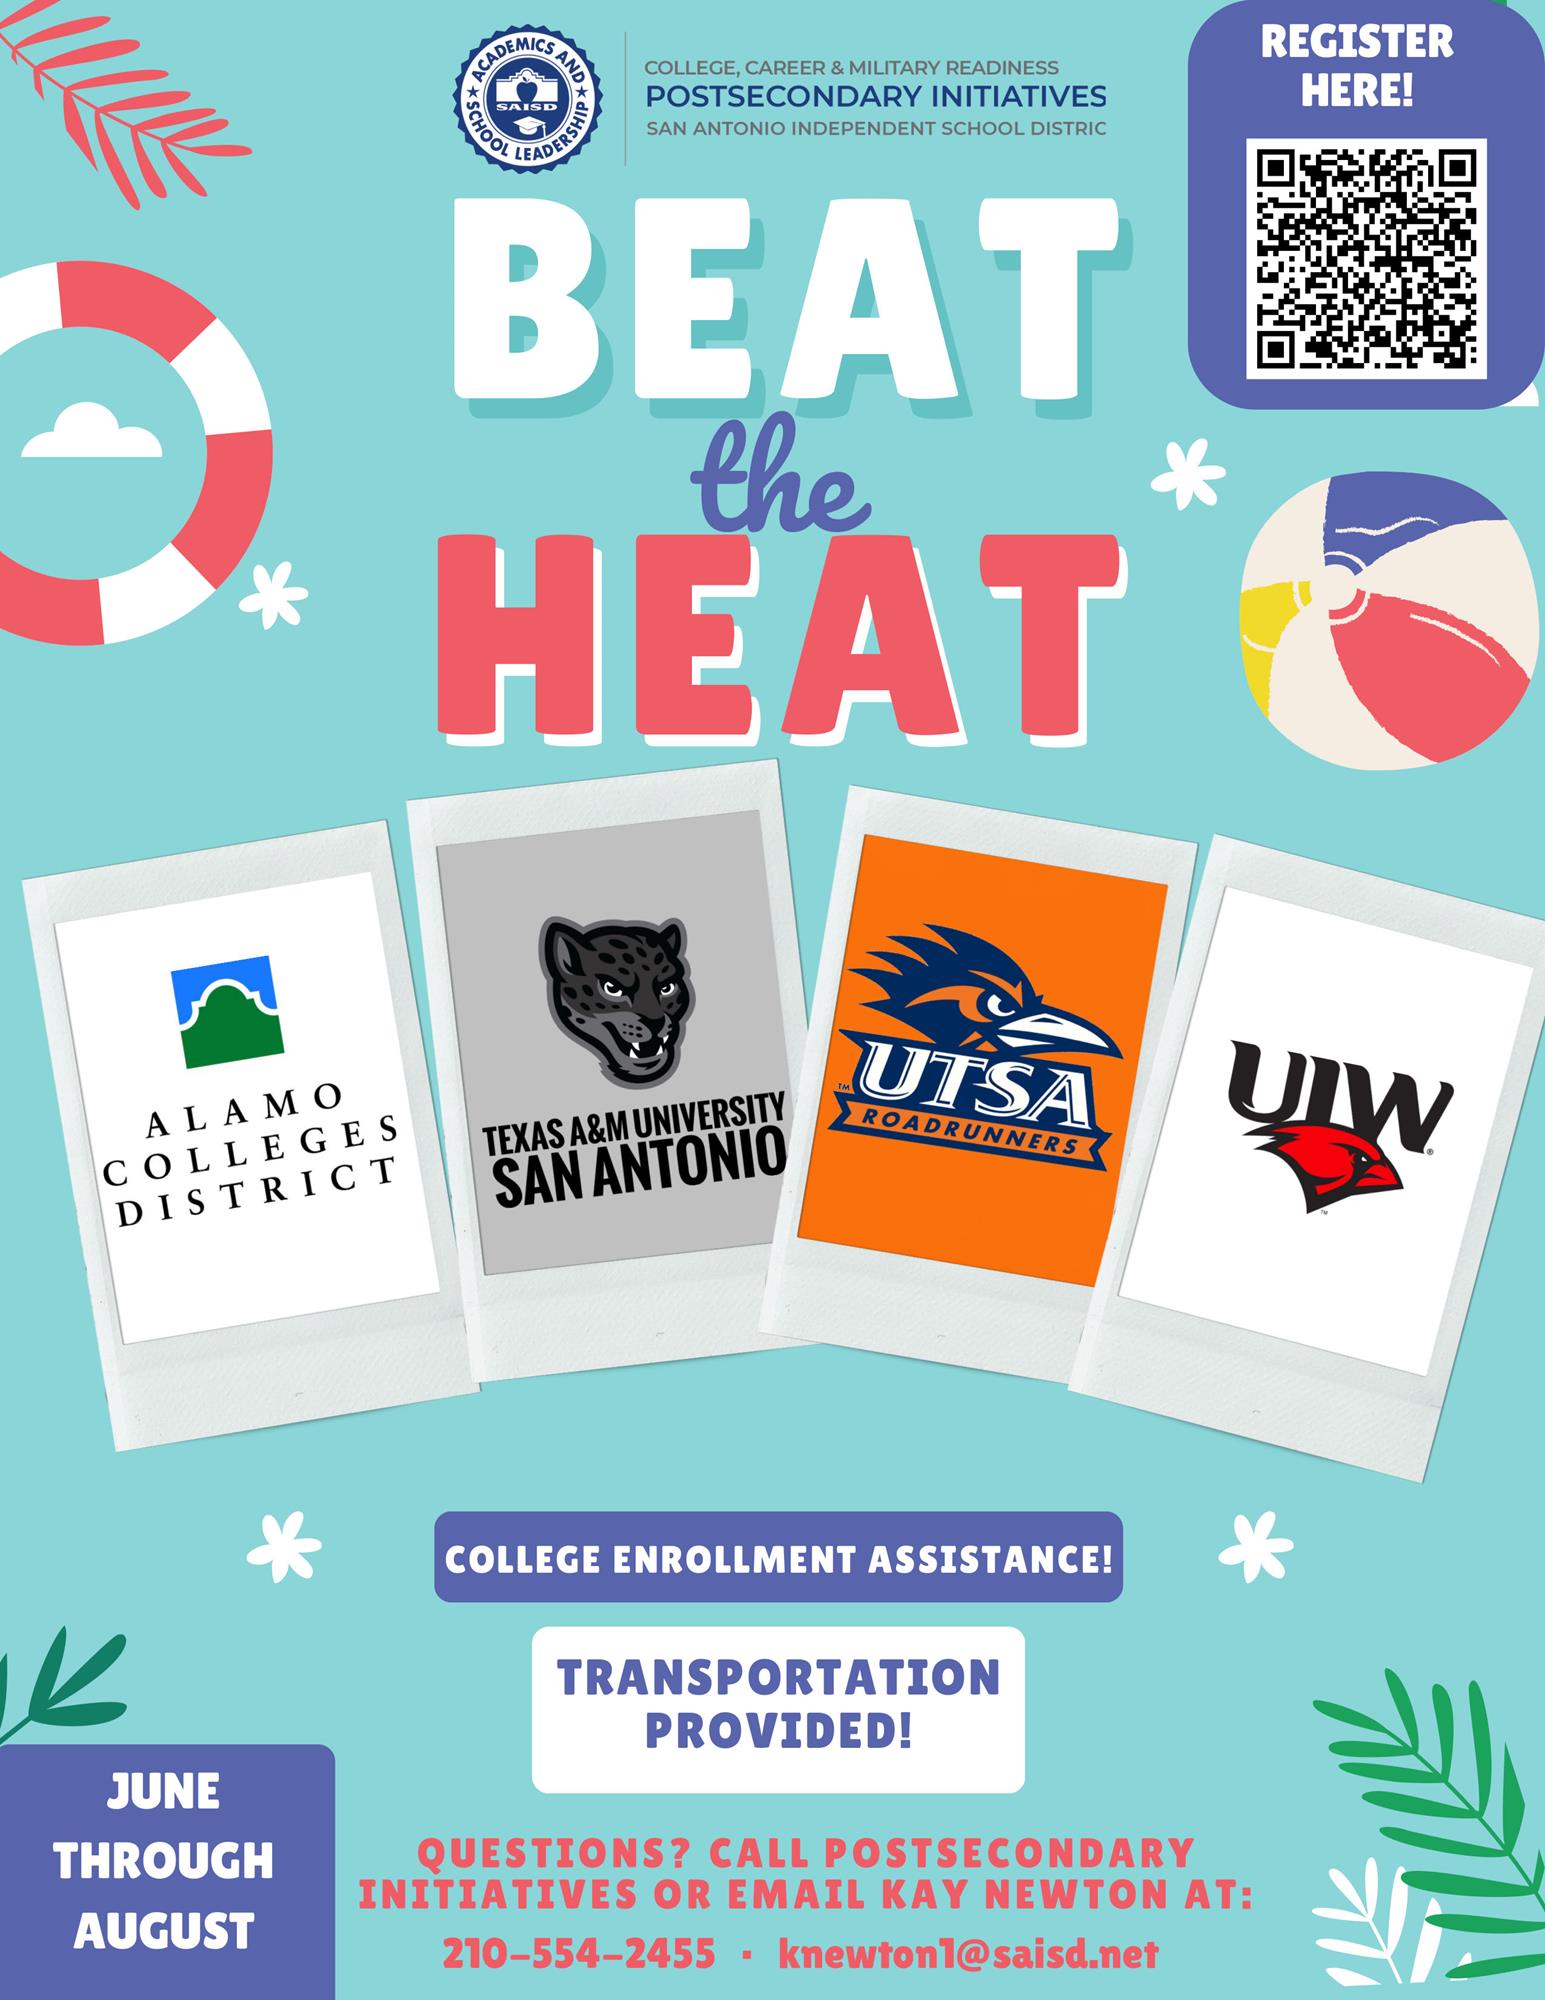 FLyer for the Beat the Heat trips happeing June through August of 2023. Colleges visiting will include San Antonio College, St. Philips College, Palo Alto College, Texas A&M University, The University of Texas at San Antonio, and University of the Incarnate Word